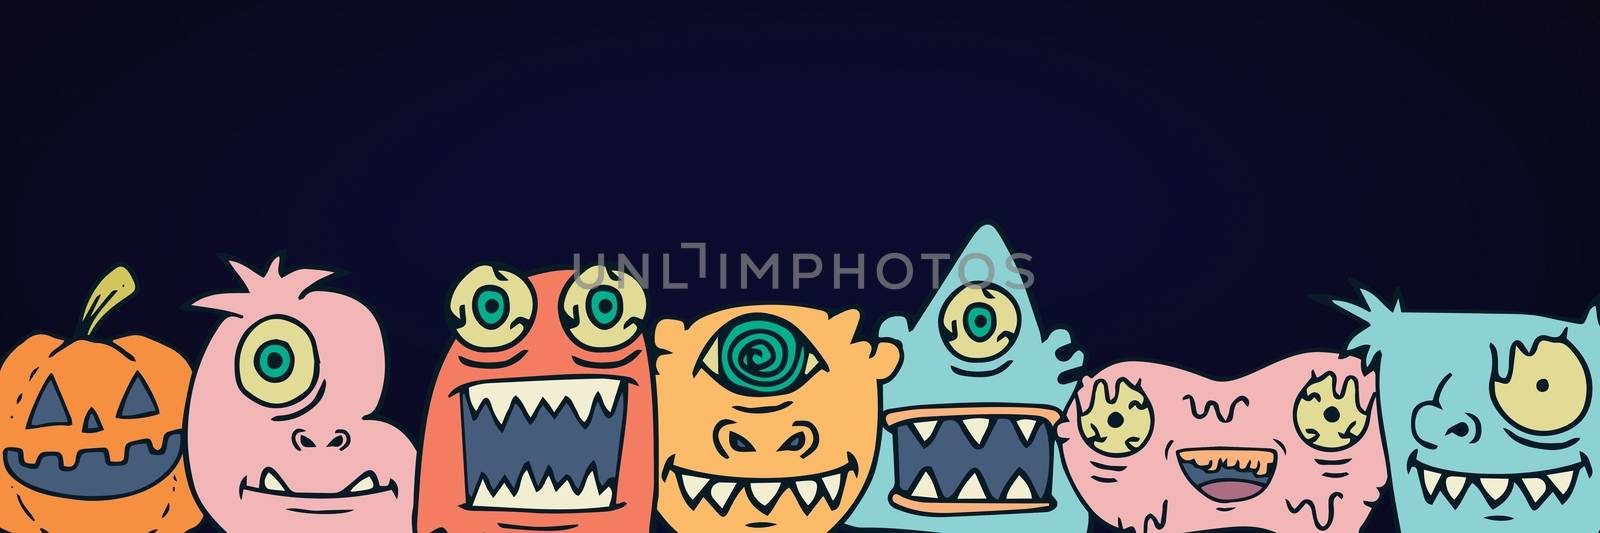 Digital composite of Monster halloween heads illustrations in a row